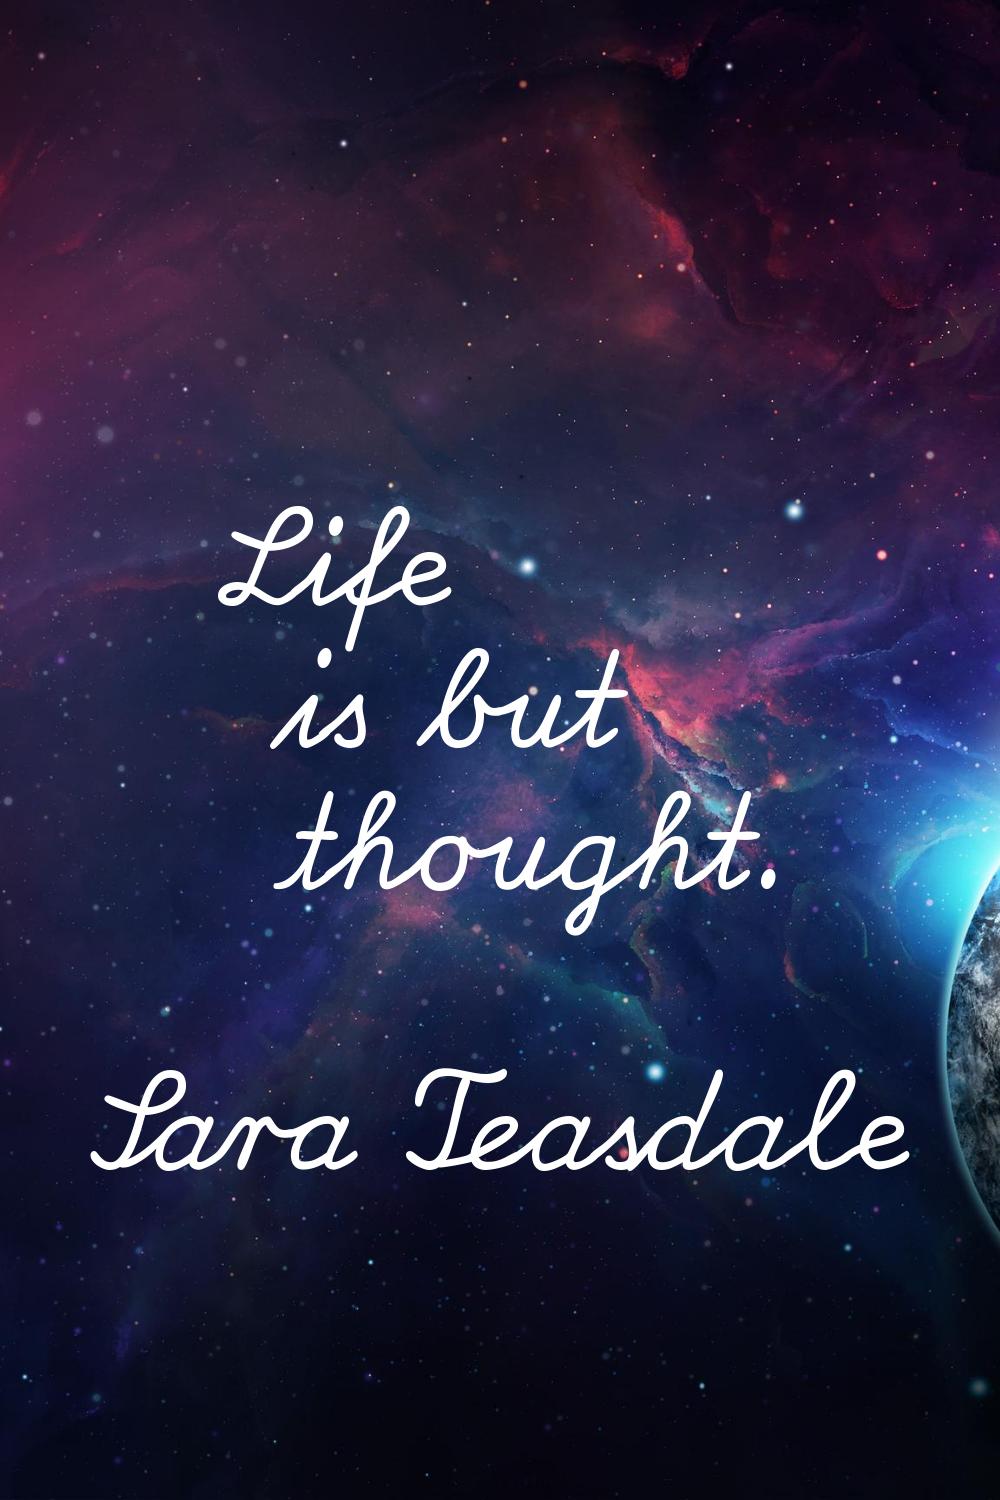 Life is but thought.